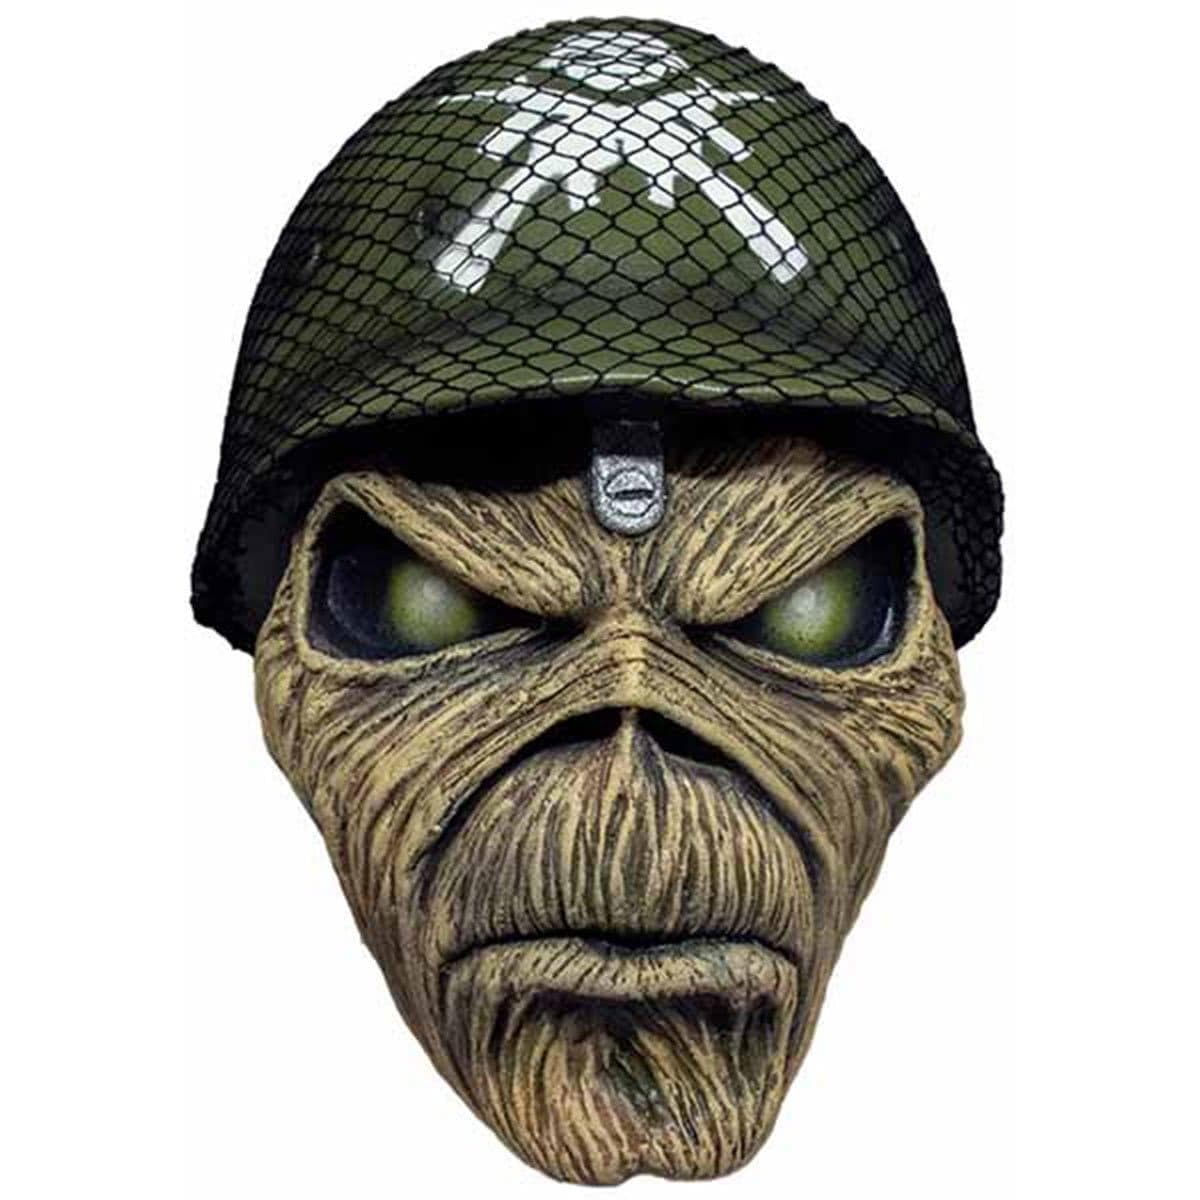 Buy Costume Accessories Eddie Mask, Iron Maiden sold at Party Expert